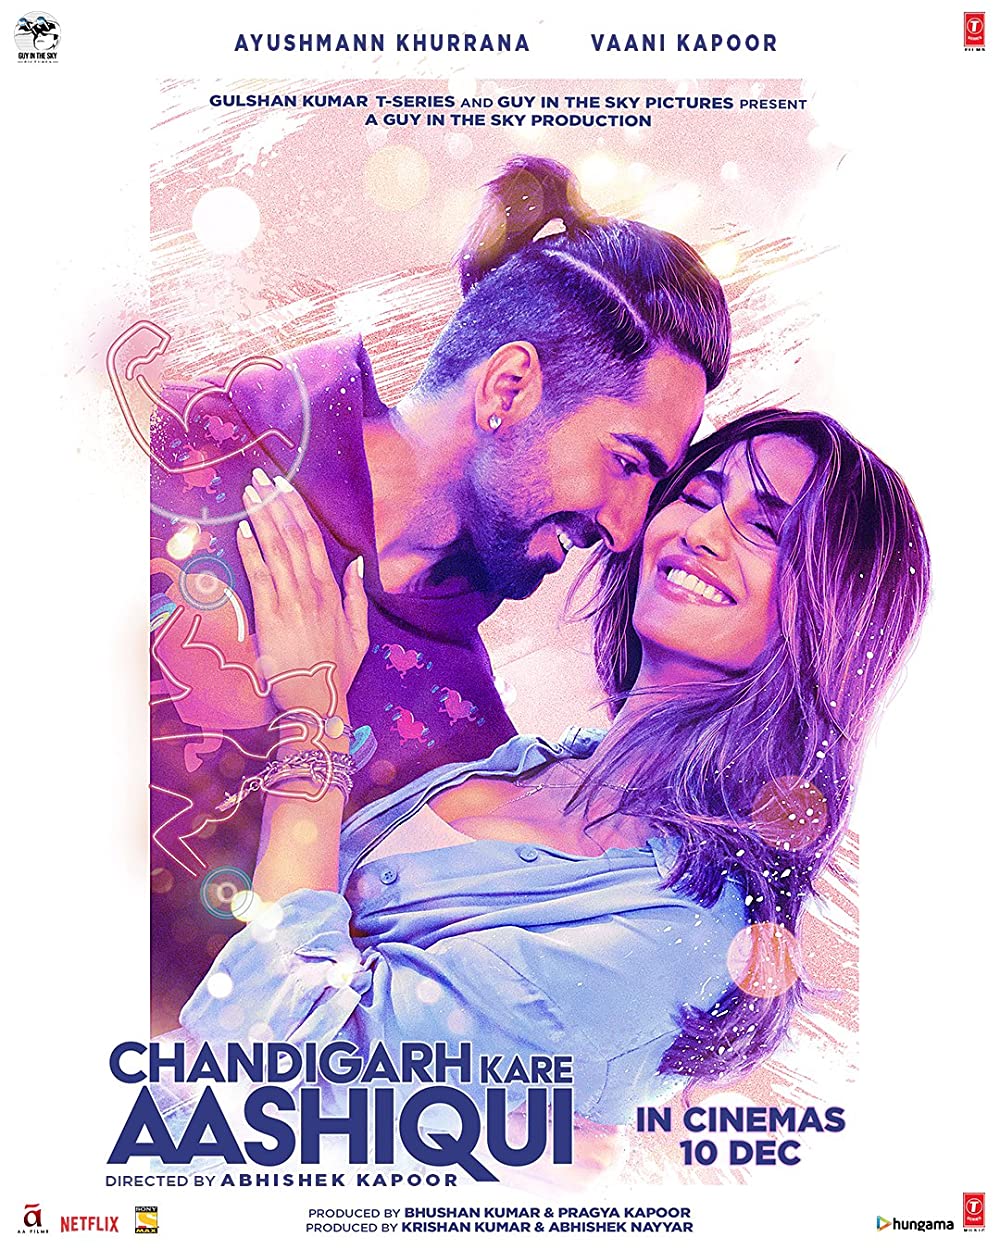 Chandigarh Kare Aashiqui Movie (2021) Cast & Crew, Release Date, Story, Review, Poster, Trailer, Budget, Collection 